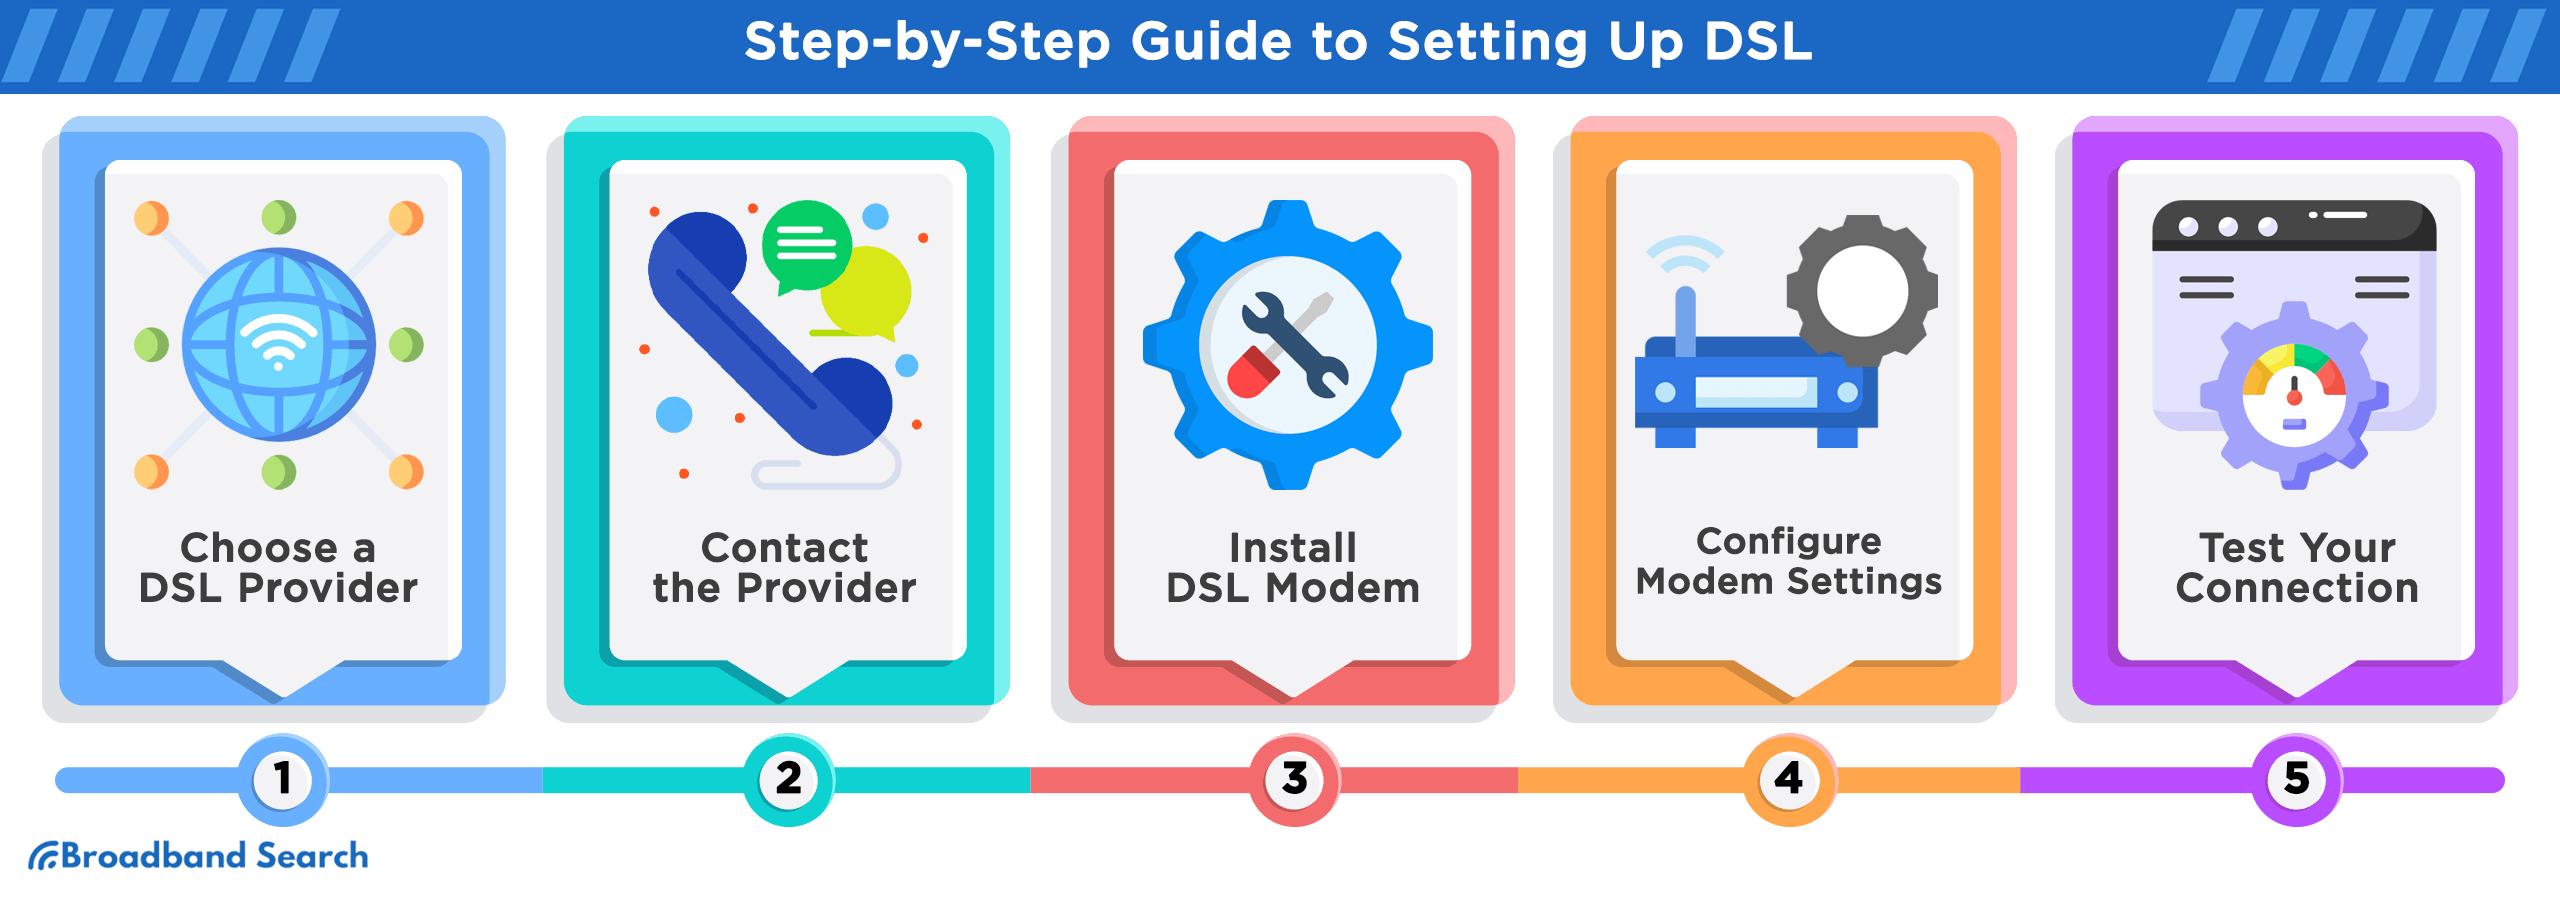 Step by step guide to setting up DSL